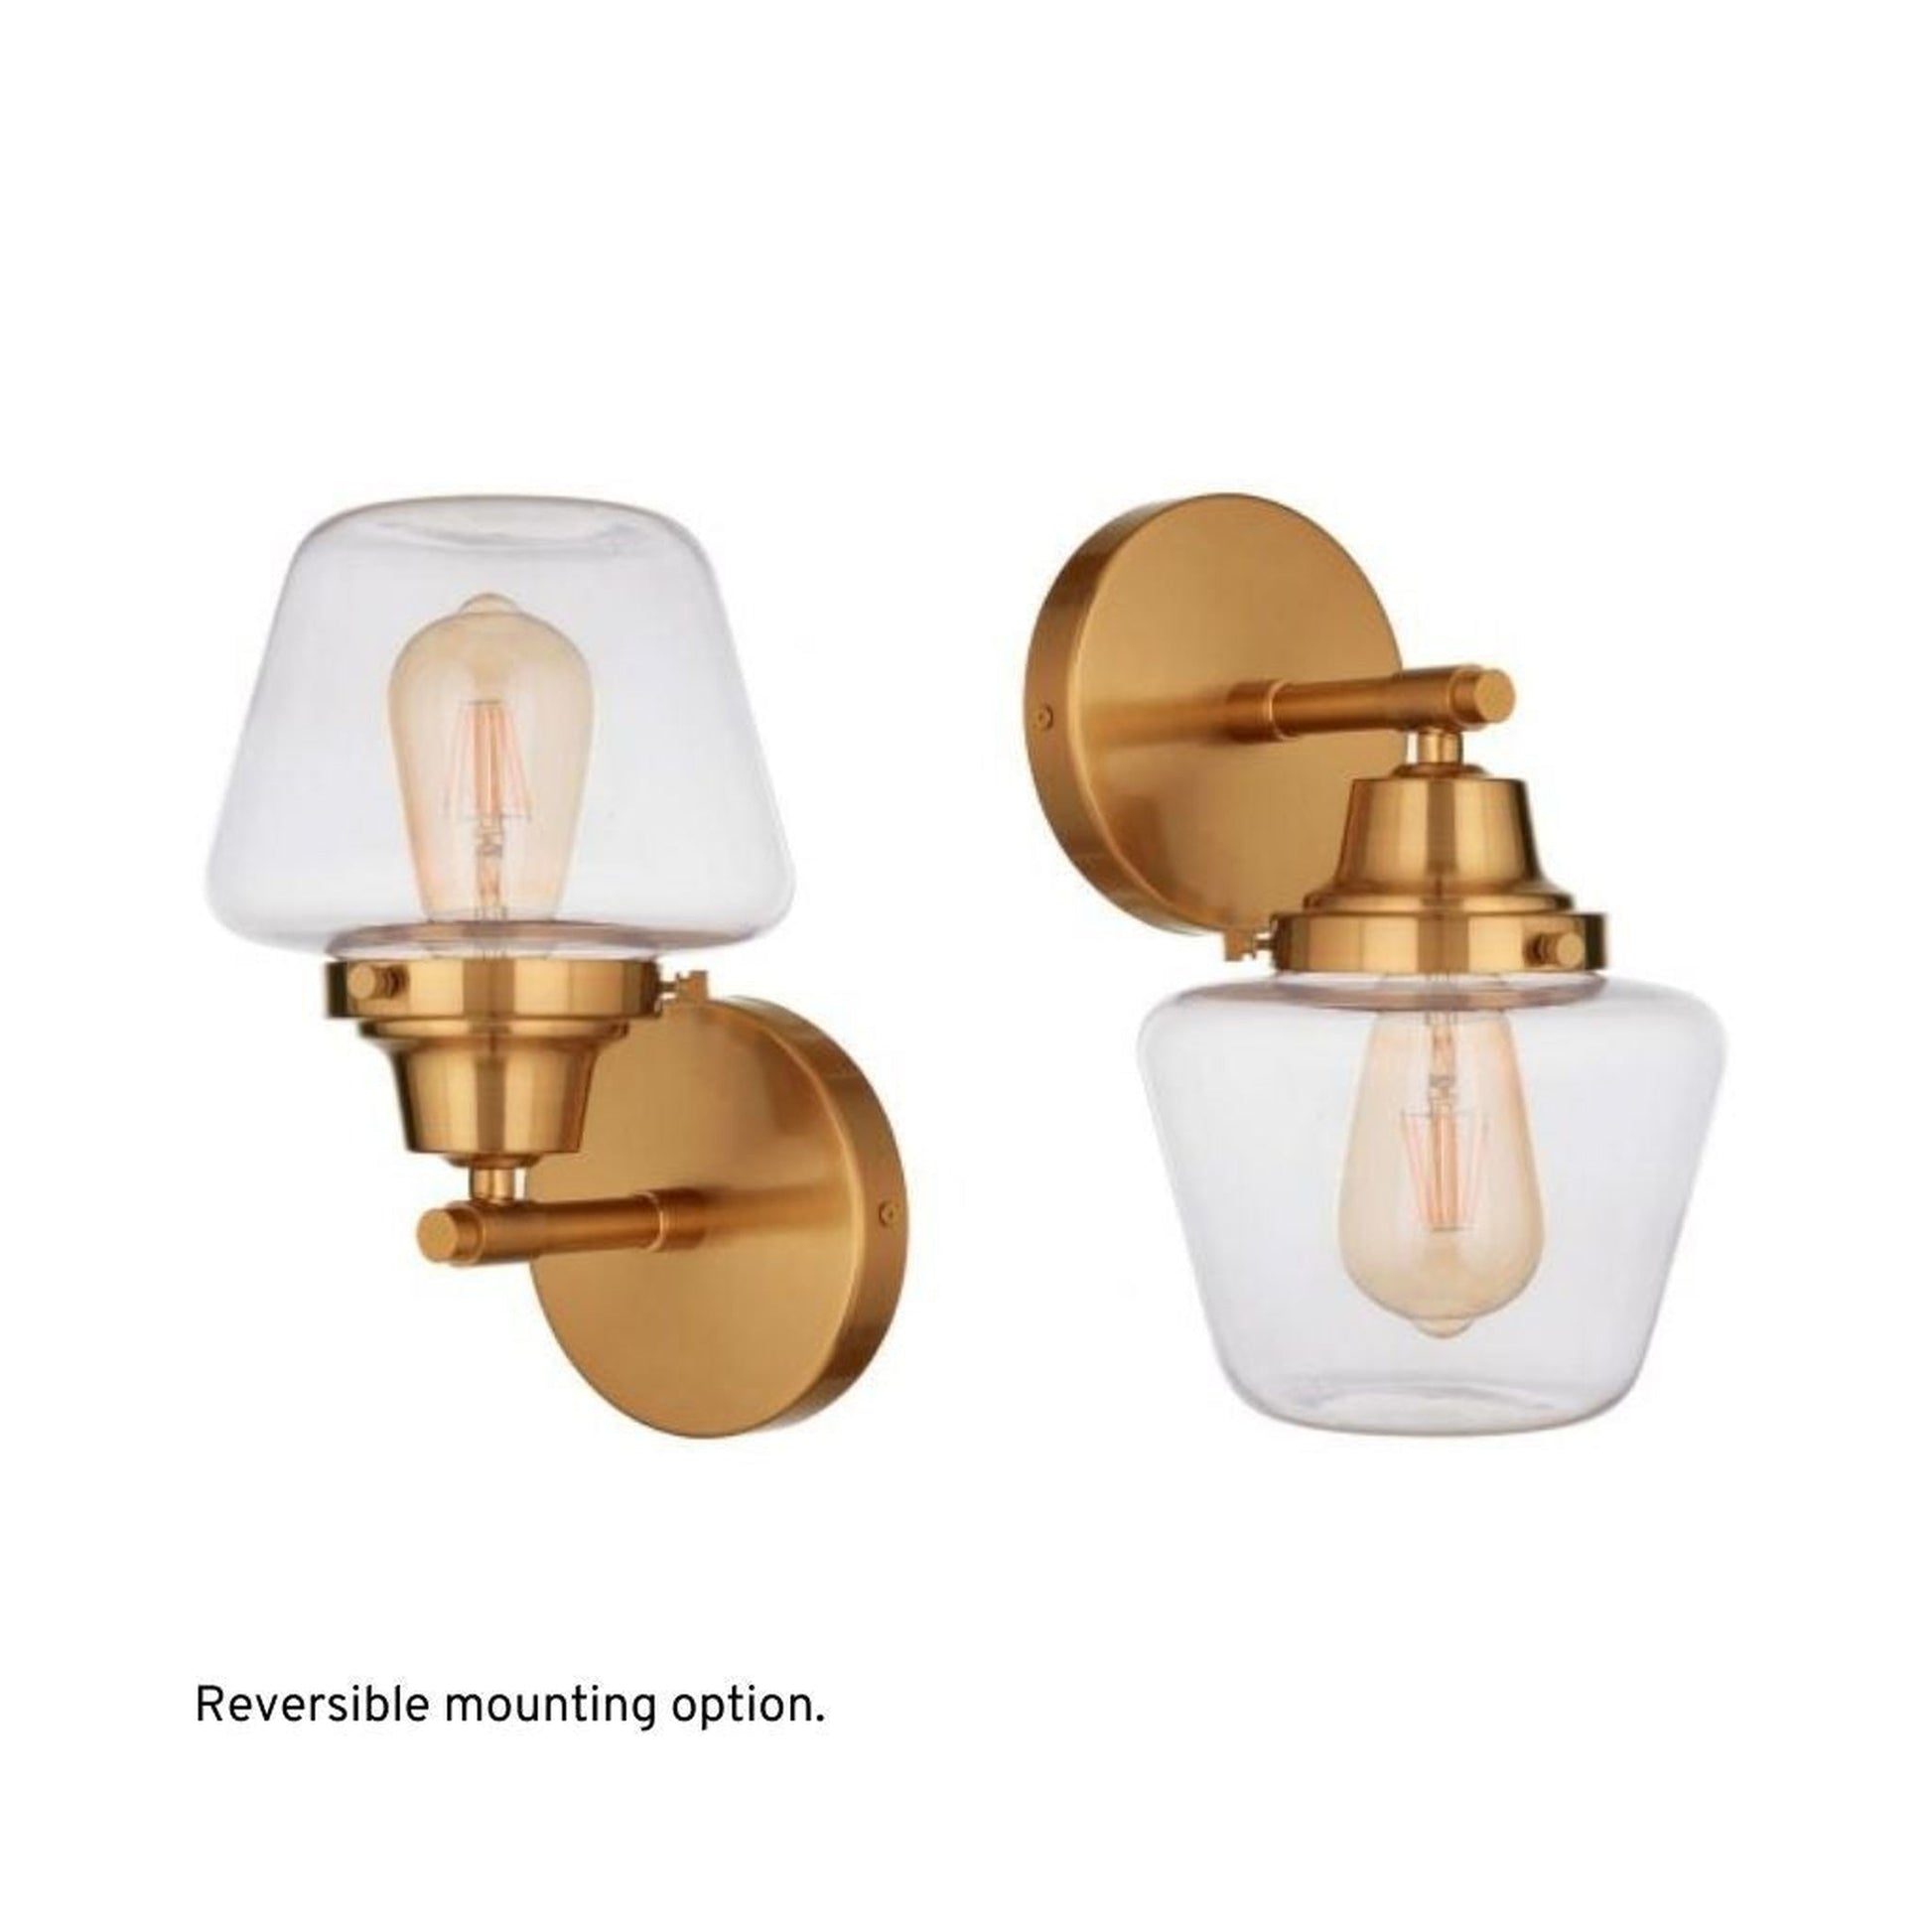 Craftmade Essex 7" x 12" 1-Light Satin Brass Wall Sconce With Clear Glass Shade